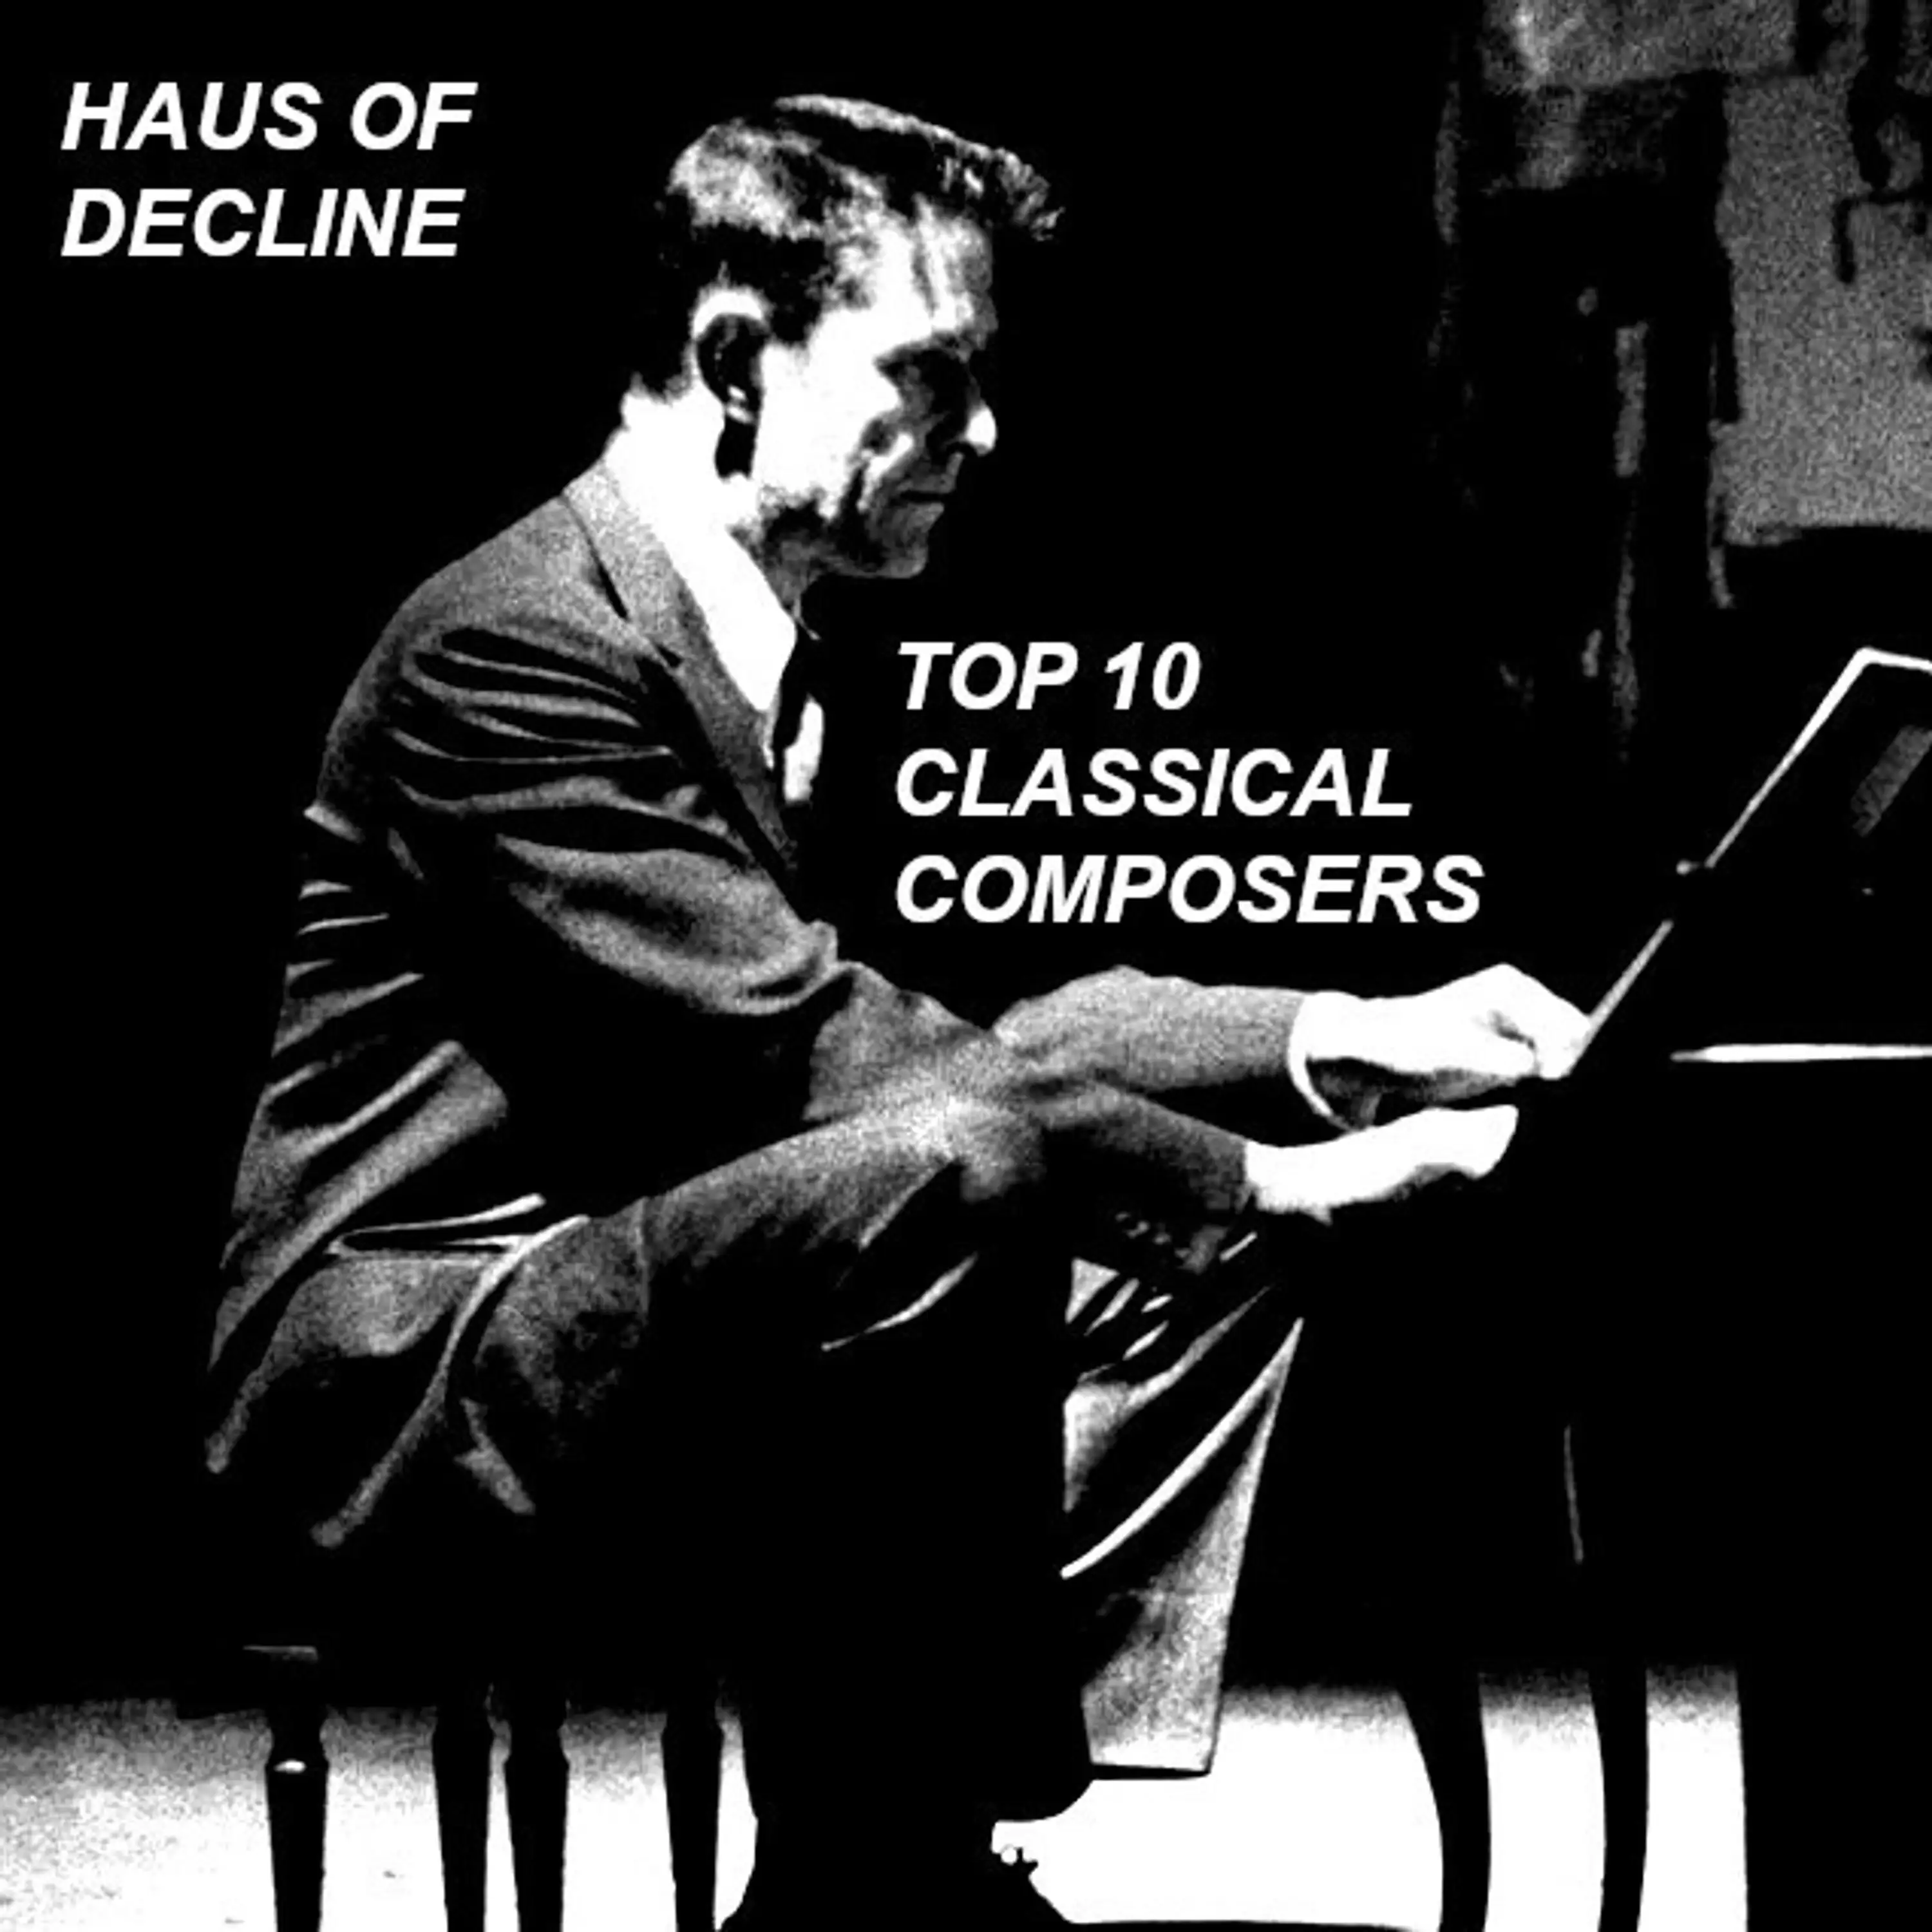 Top 10 Classical Composers